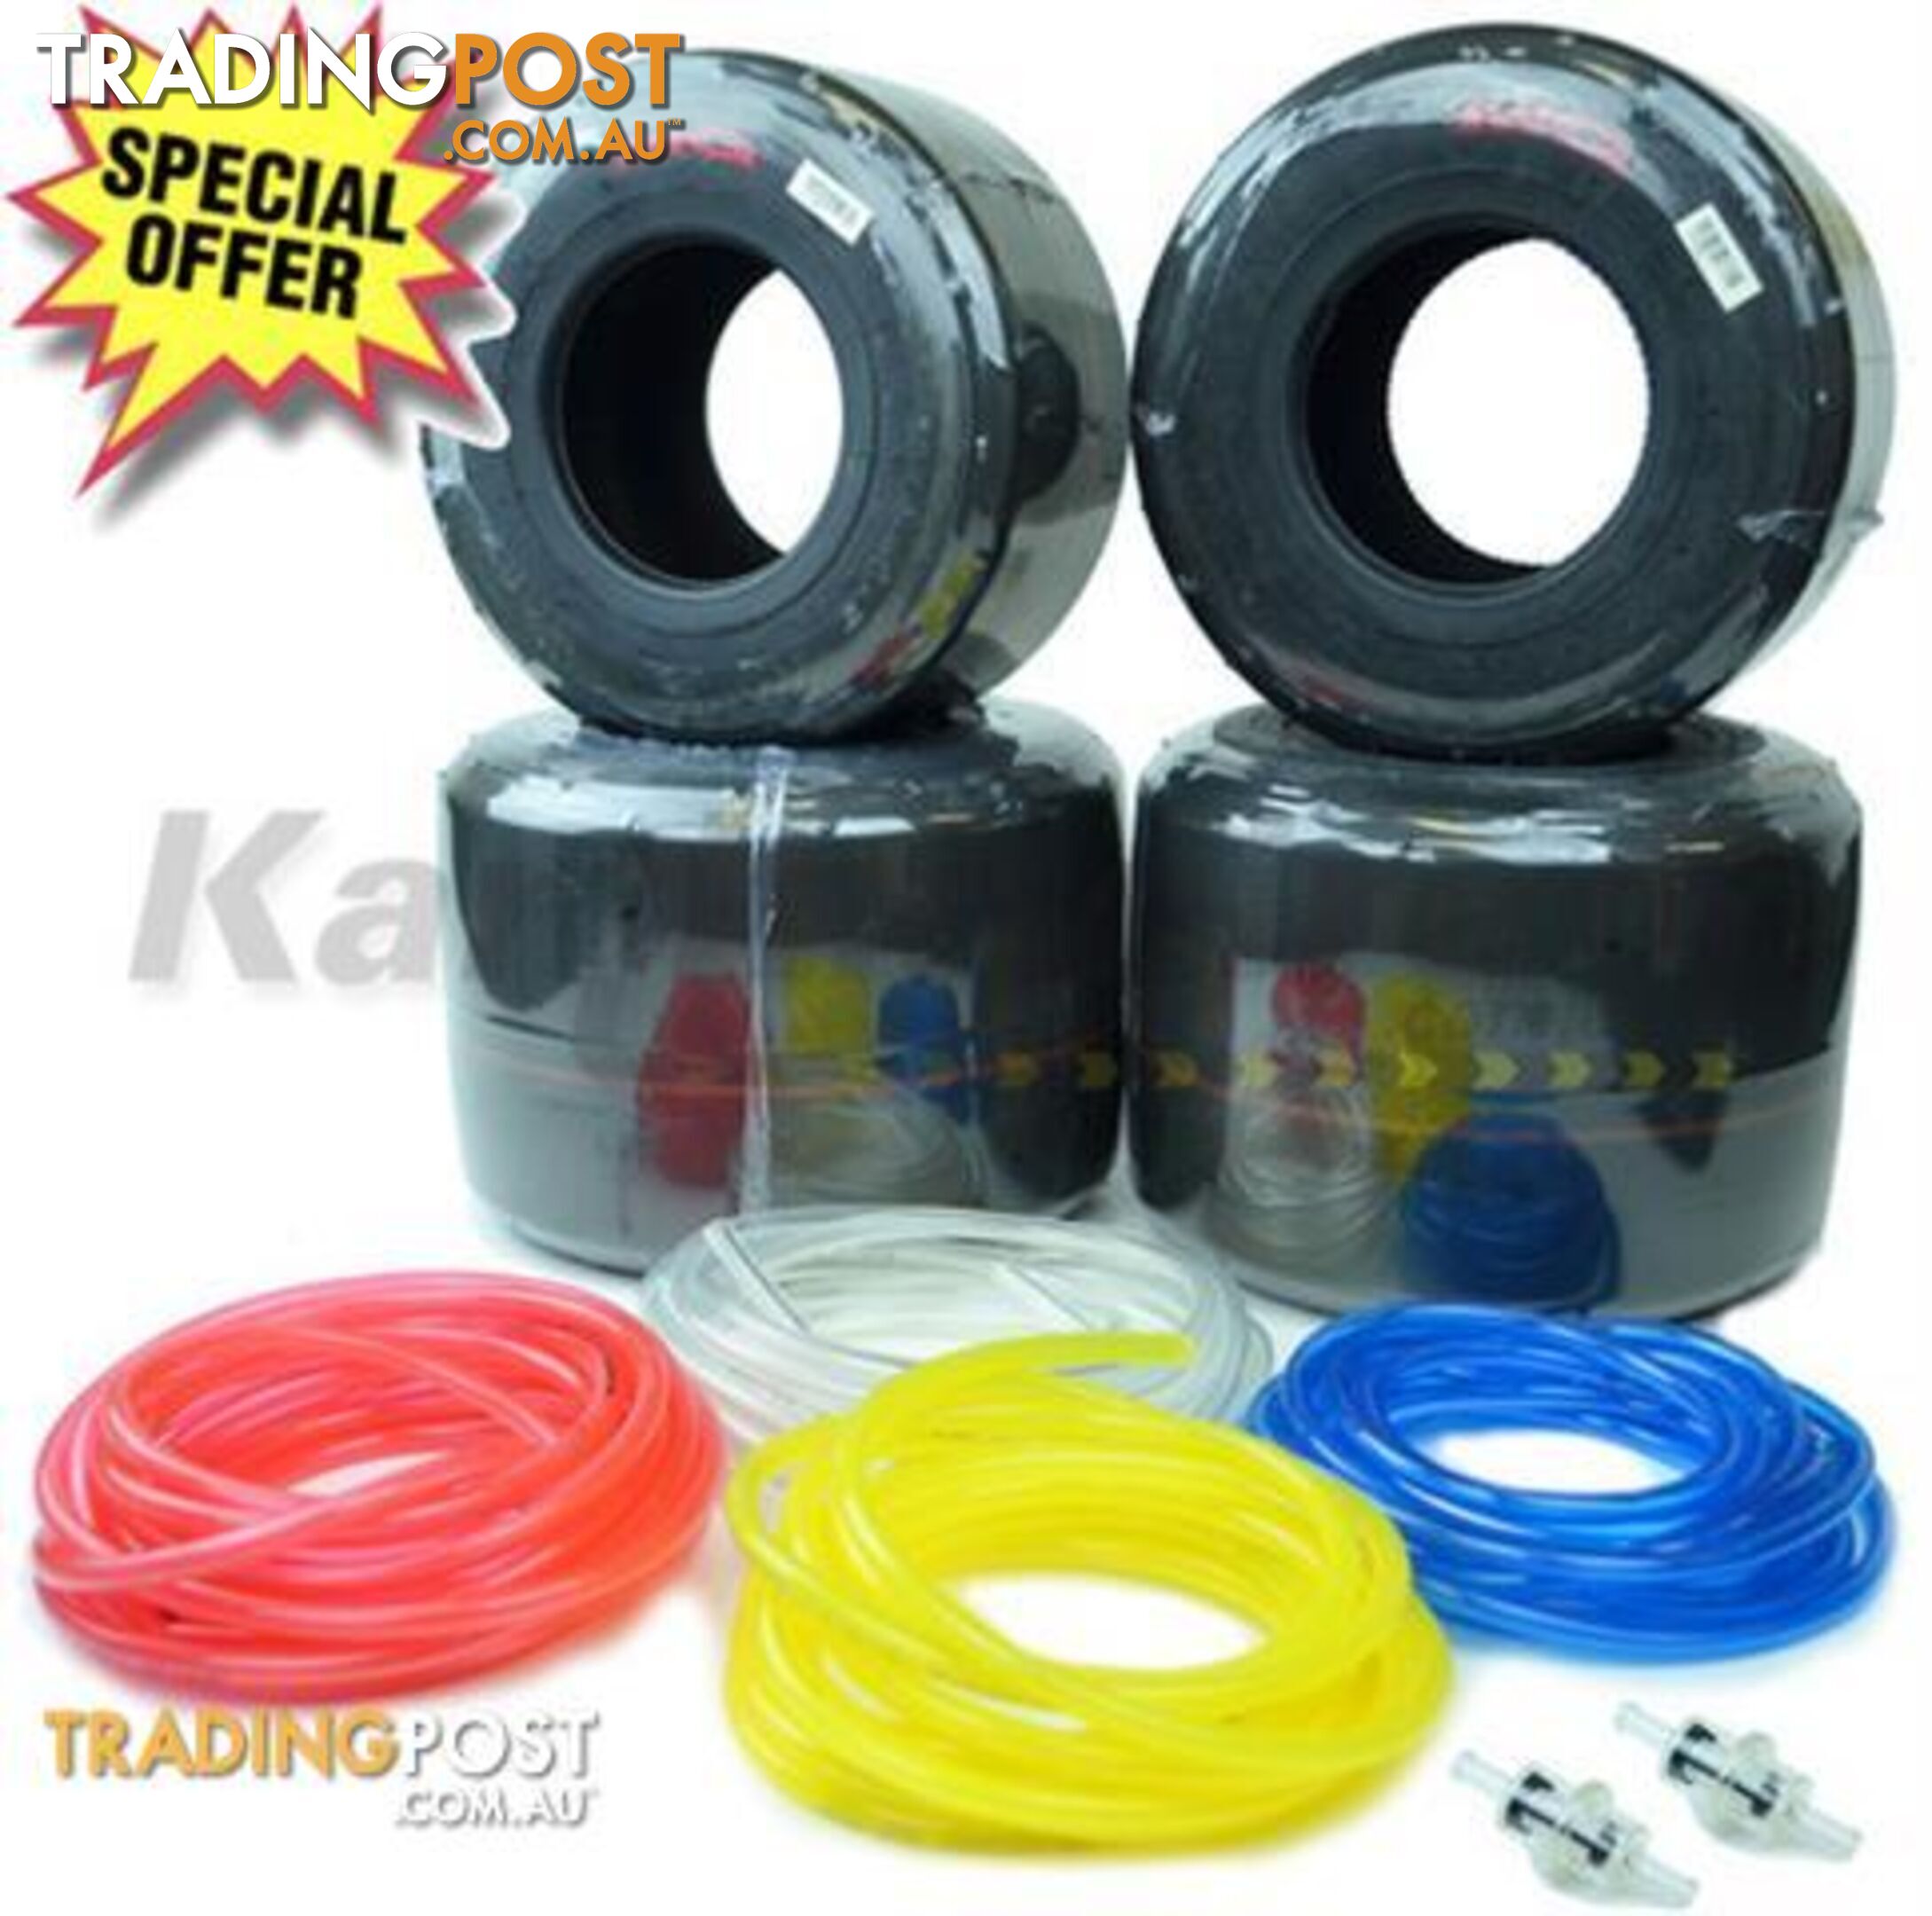 Go Kart MG Red FULL SET TYRES W/ 3M FUEL LINE AND 2 HI FLOW FUEL FILTERS Full set on MG YELLOW tyres 3m Fuel Line, your choice between red, yellow, blue or clear. Please leave a message when checking out, if no message is left a random colour will be sent